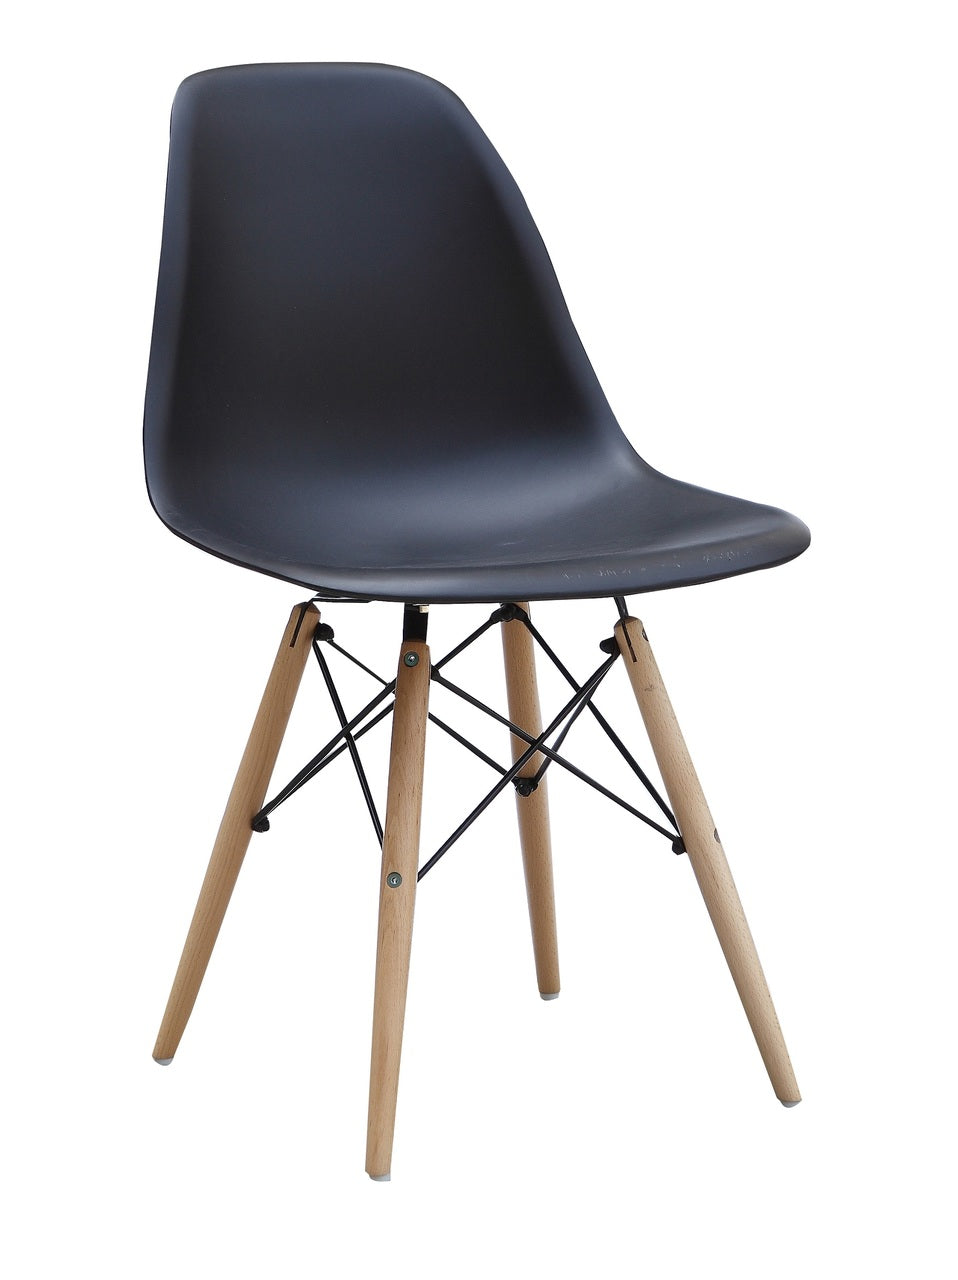 ViscoLogic Prague Eames Style High Back Molded Plastic Side Eiffel Dining Chair with Natural Wood Legs (Set of 2)